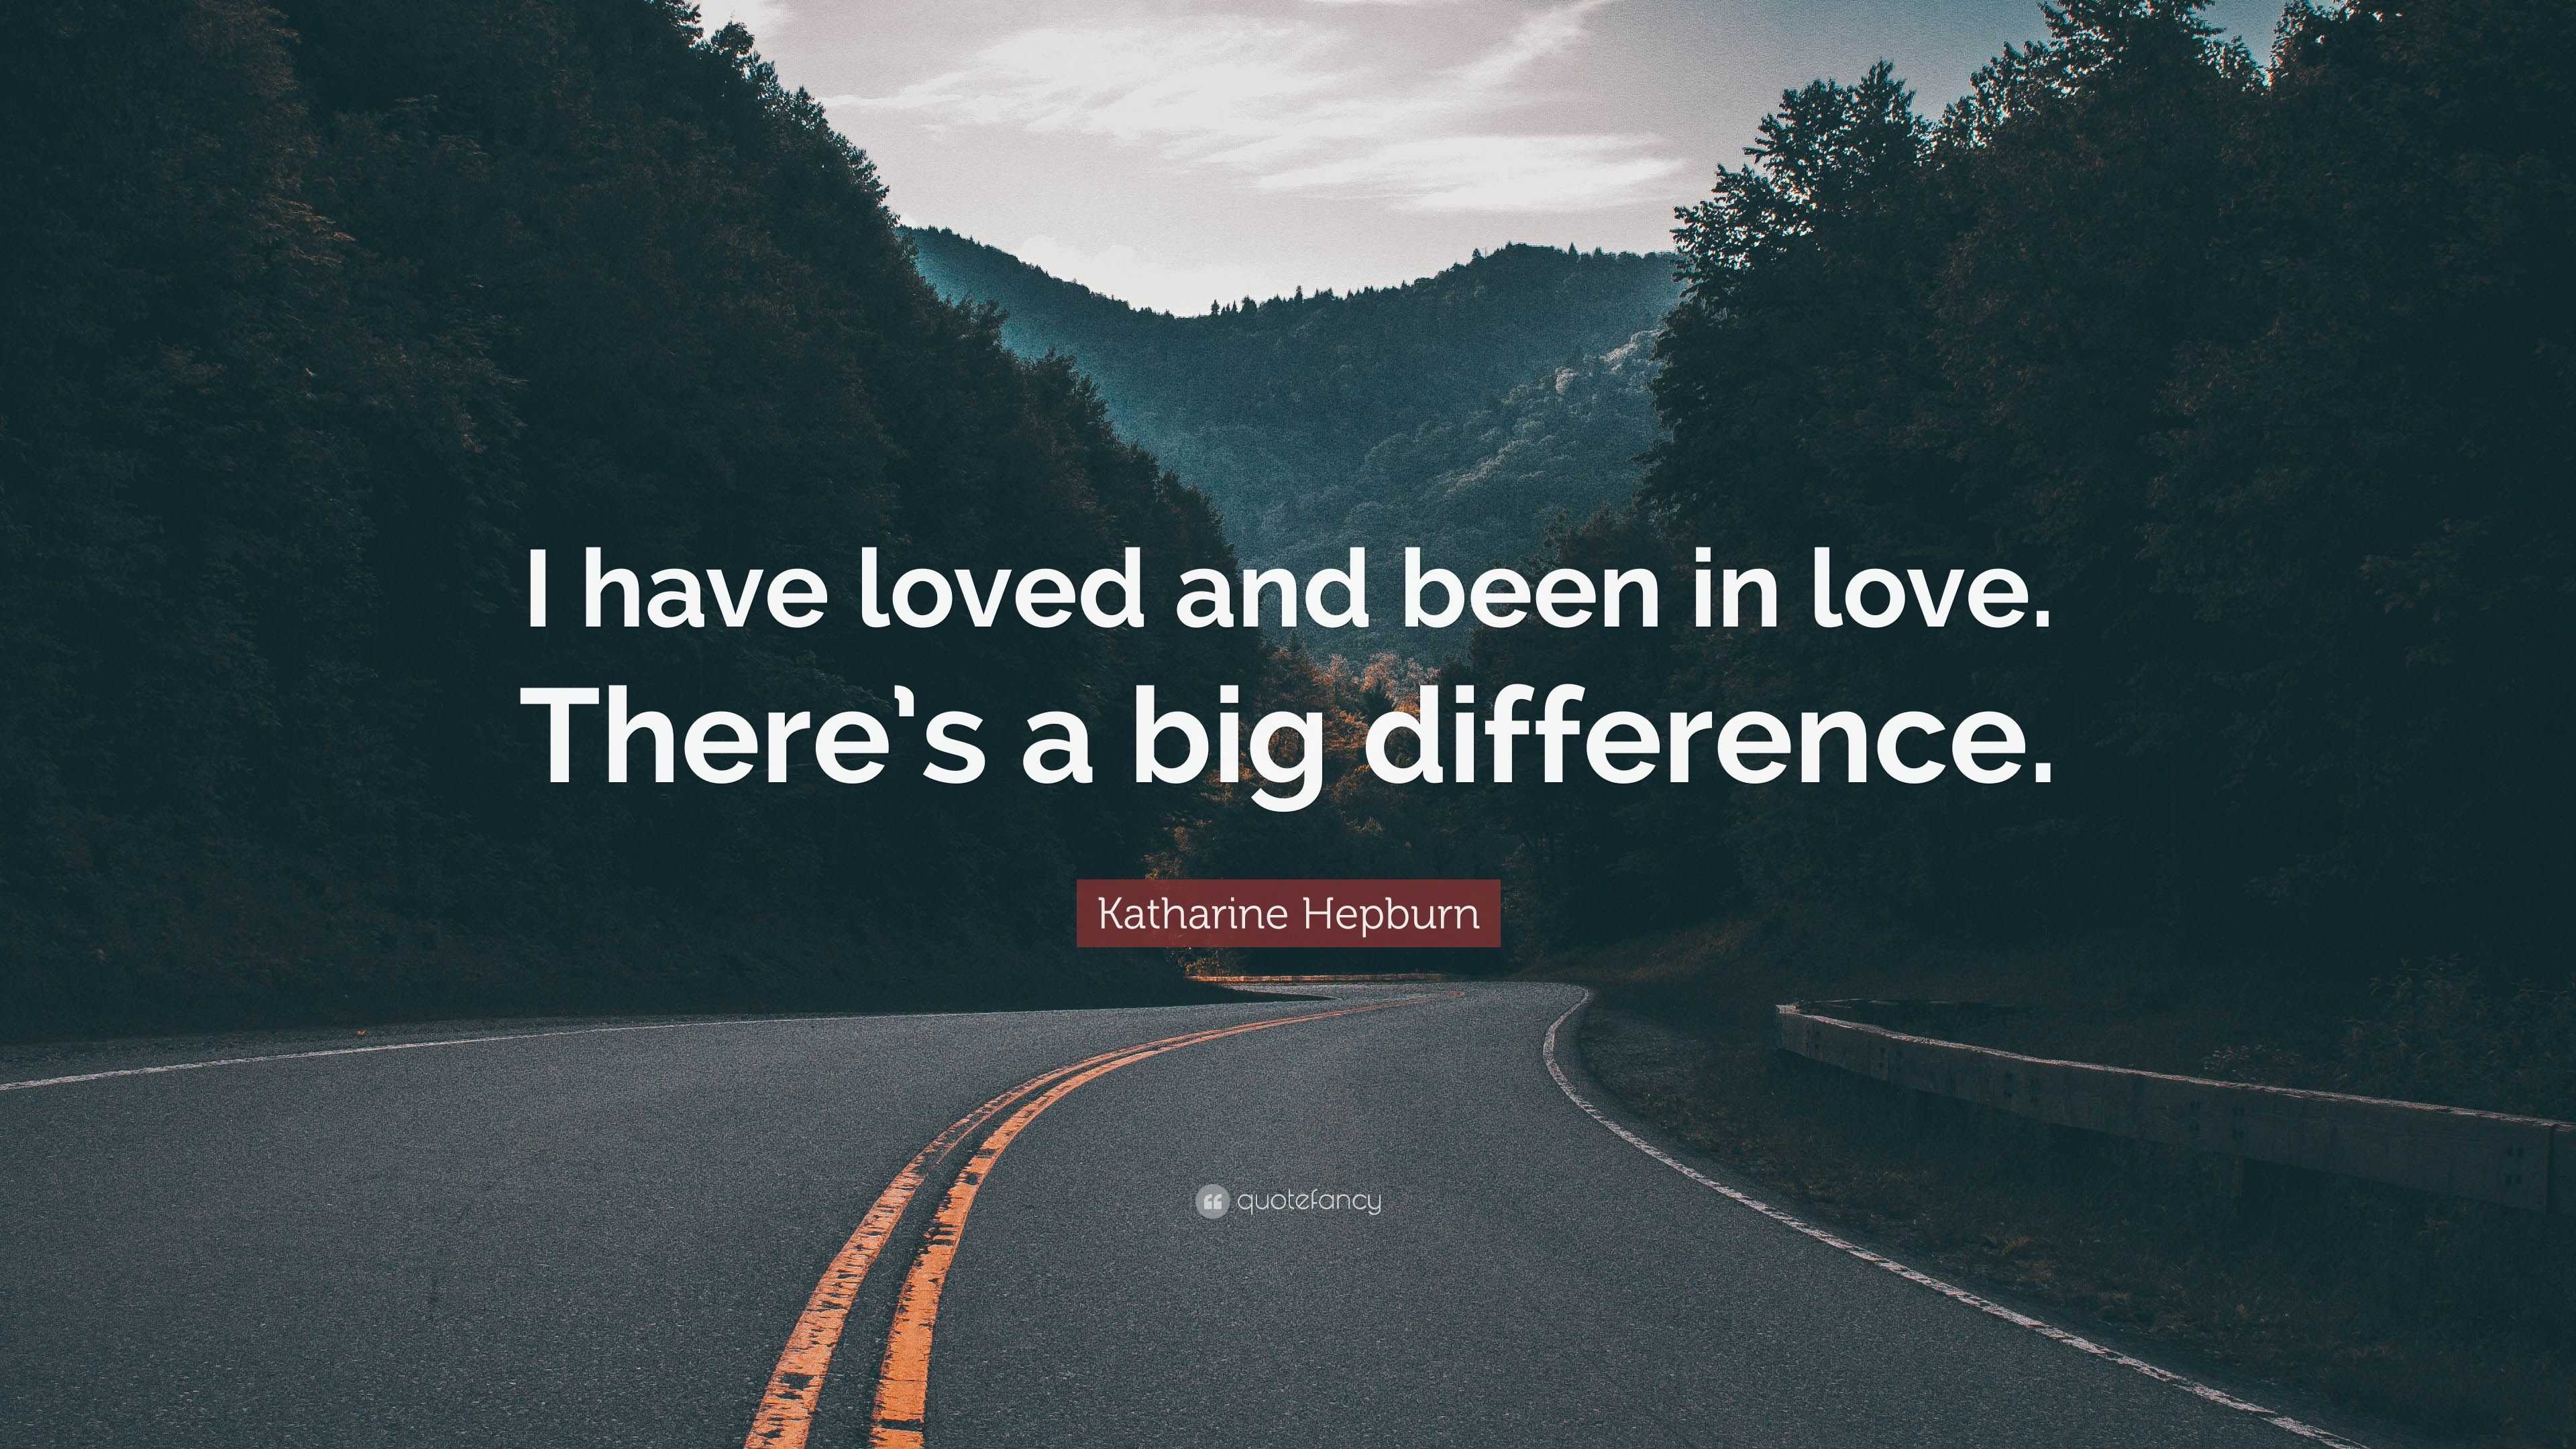 Katharine Hepburn Quote: “I have loved and been in love. There’s a big ...